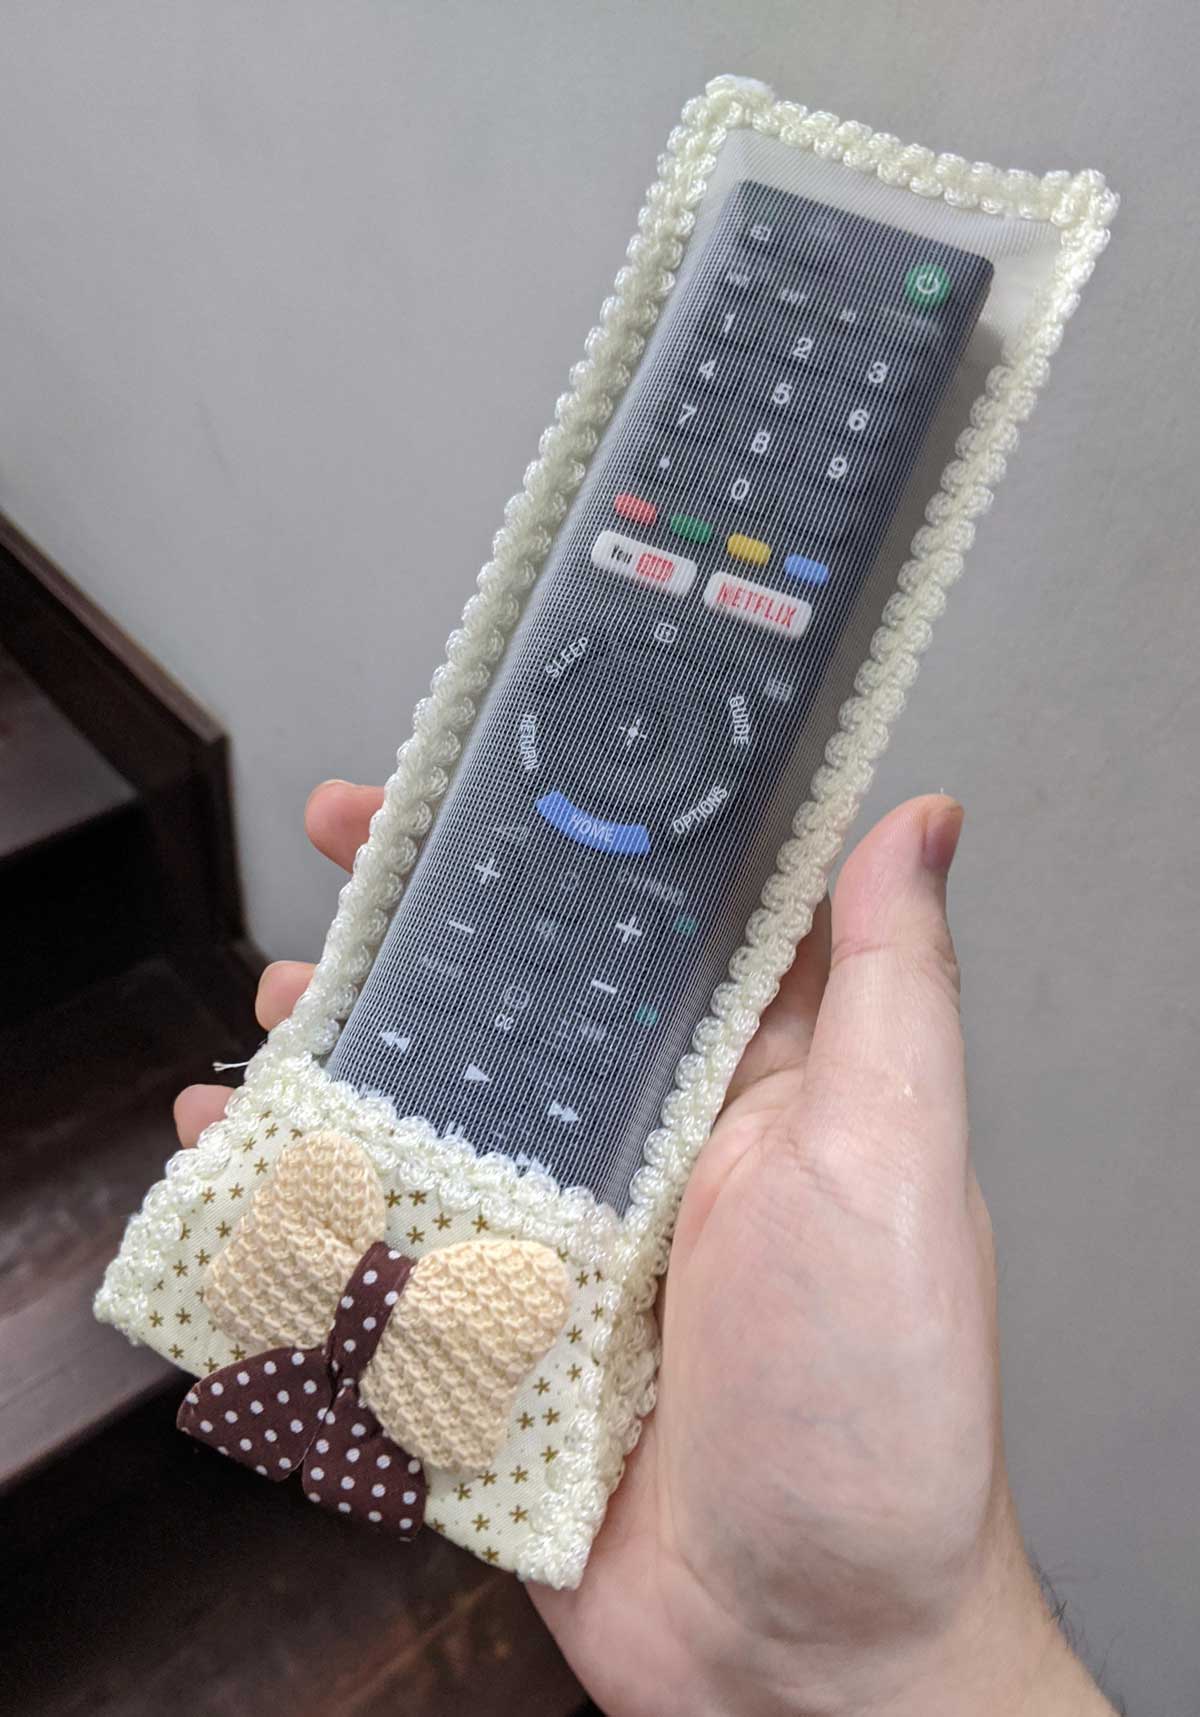 I took the plastic wrapper off the family TV remote, this was my mother's response the next day